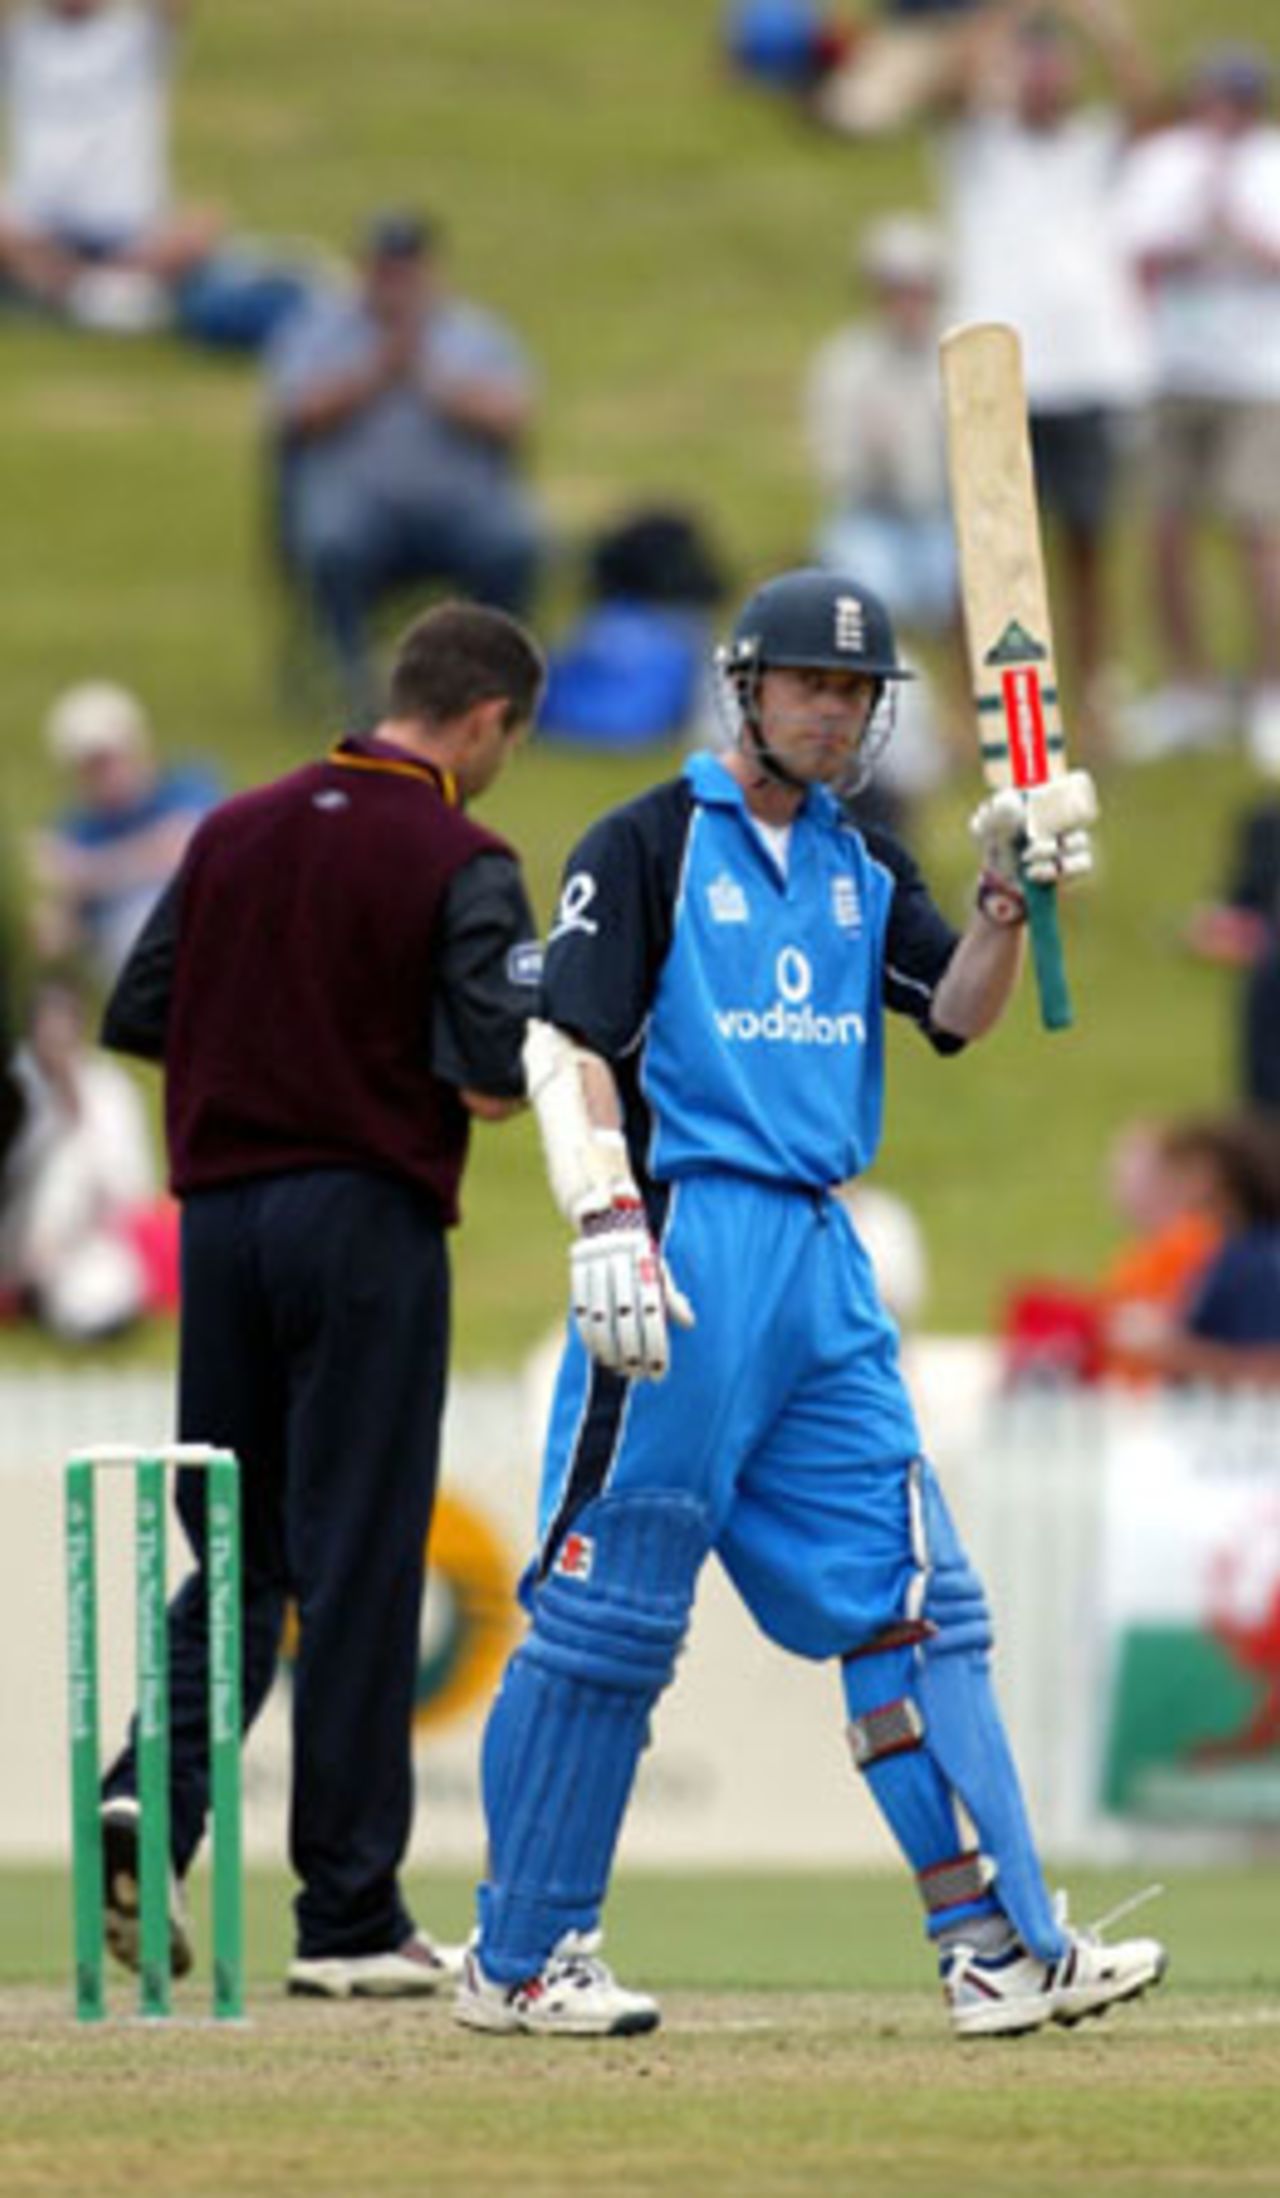 England batsman Nick Knight raises his bat to celebrate reaching his century. Knight went on to score 126. Northern Districts bowler Matthew Hart (facing away) is in the background. Tour match: Northern Districts v England at WestpacTrust Park, Hamilton, 8 February 2002.